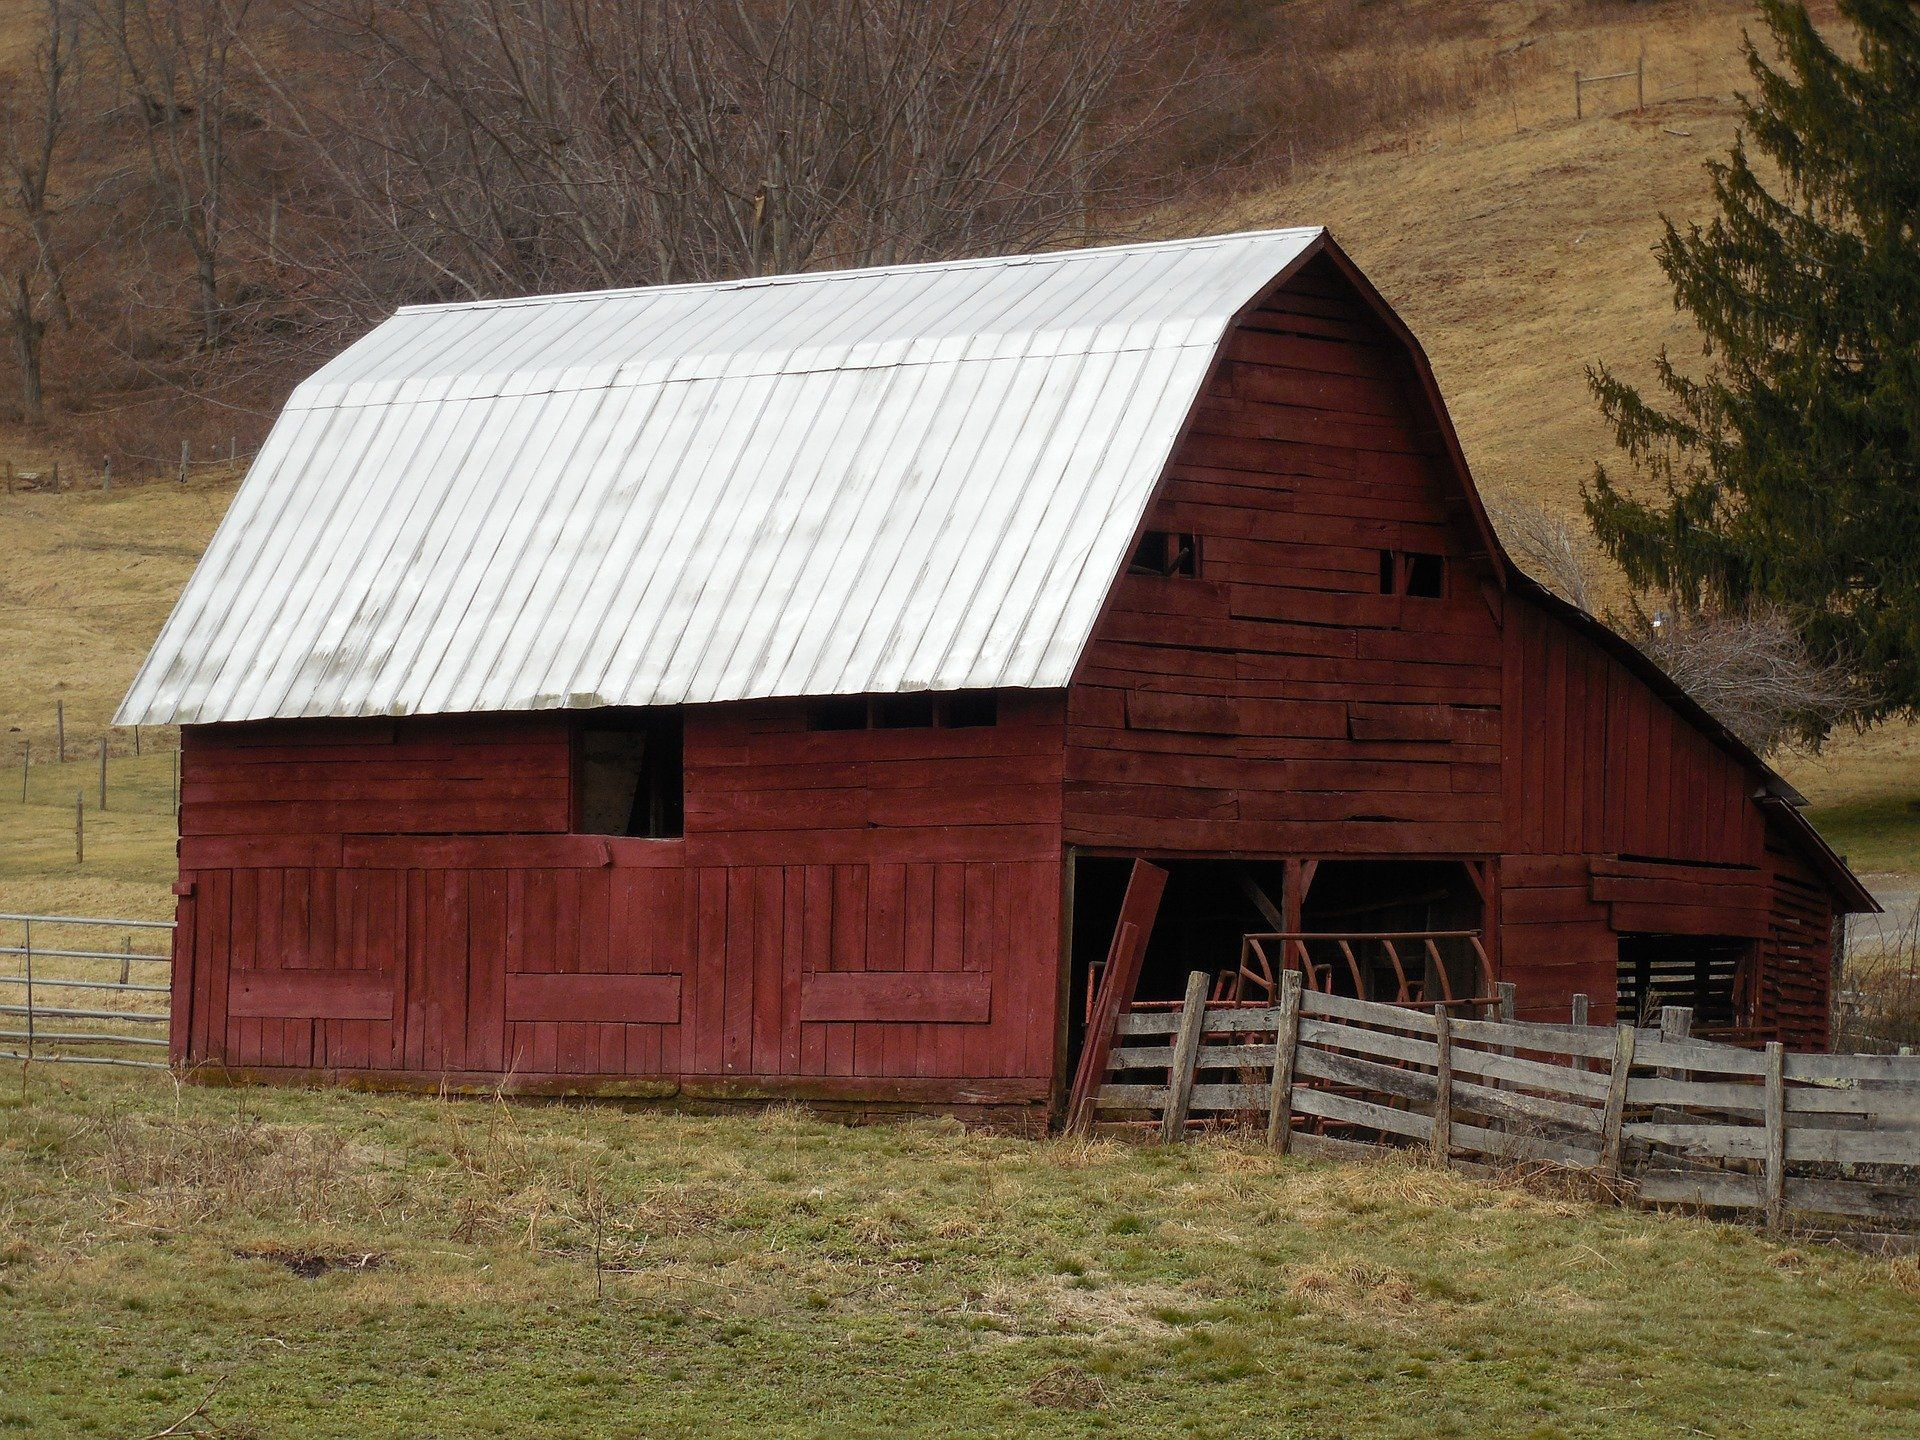 1920x1440 Why Are Barns Red? | Red barns, Barn pictures, Old barns